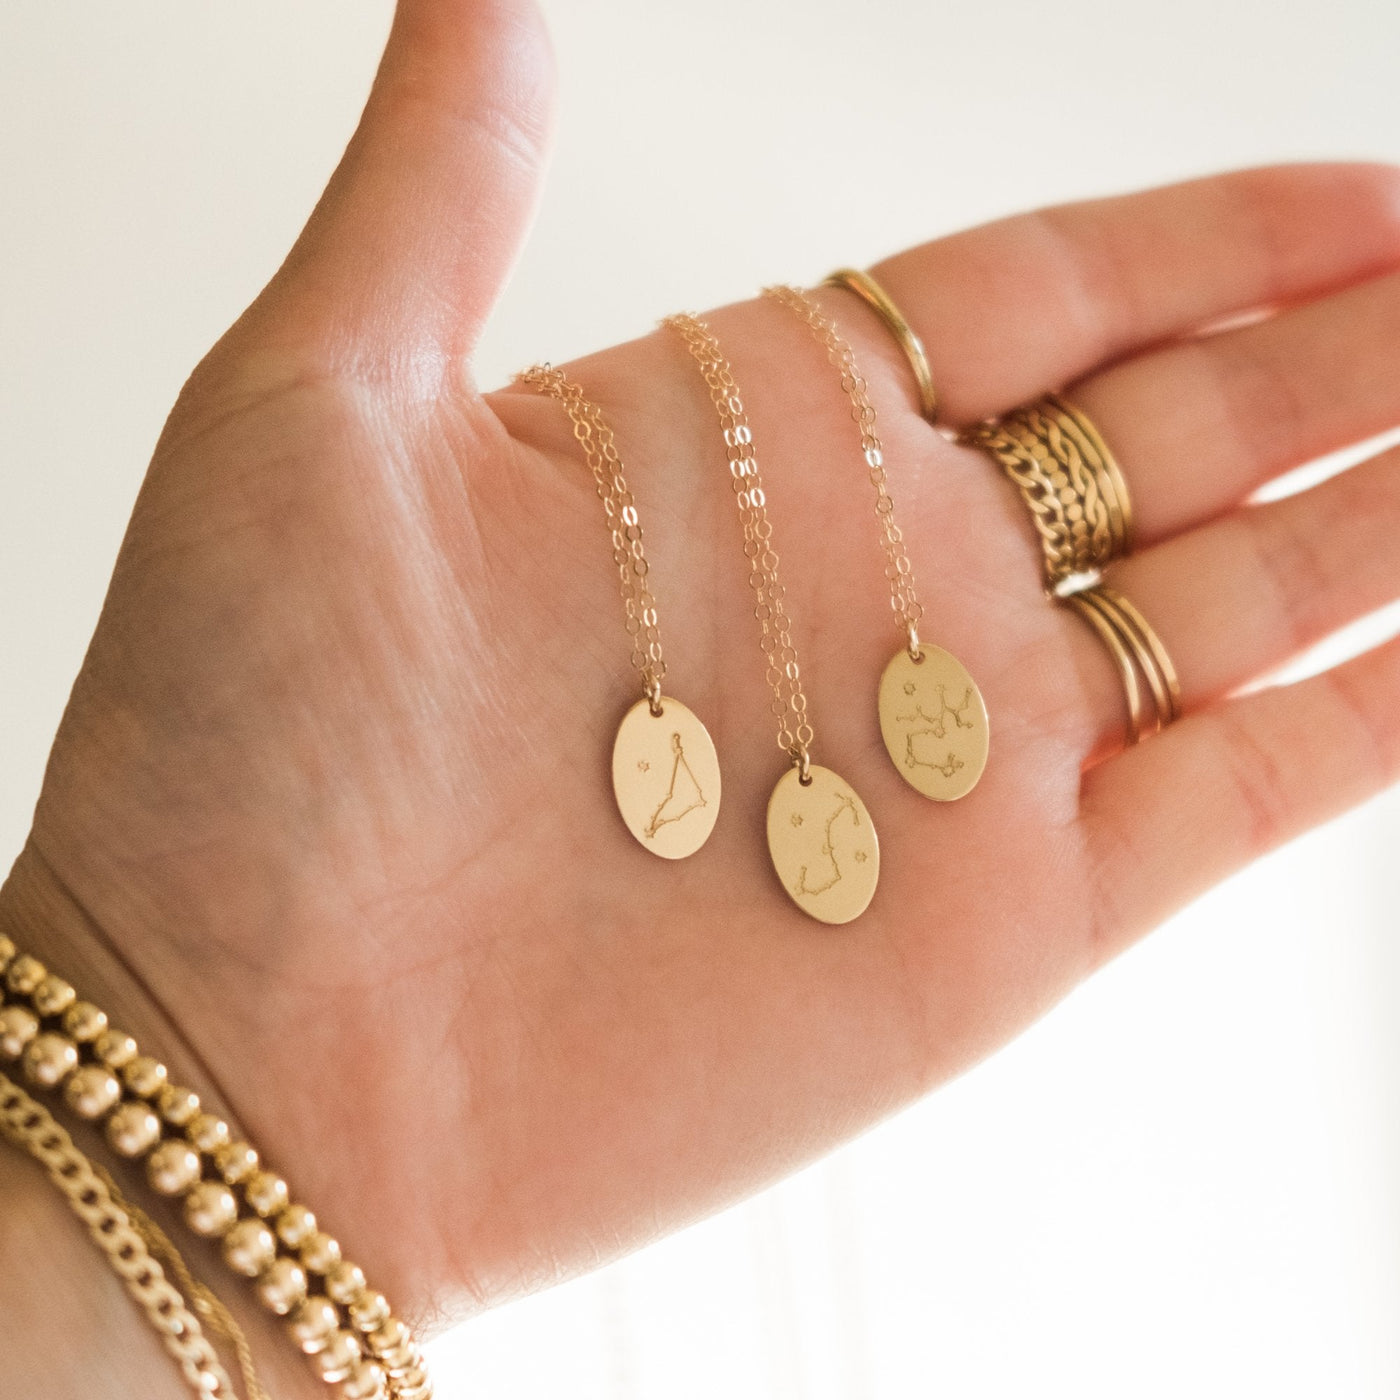 Constellation Necklace | Simple & Dainty Jewelry